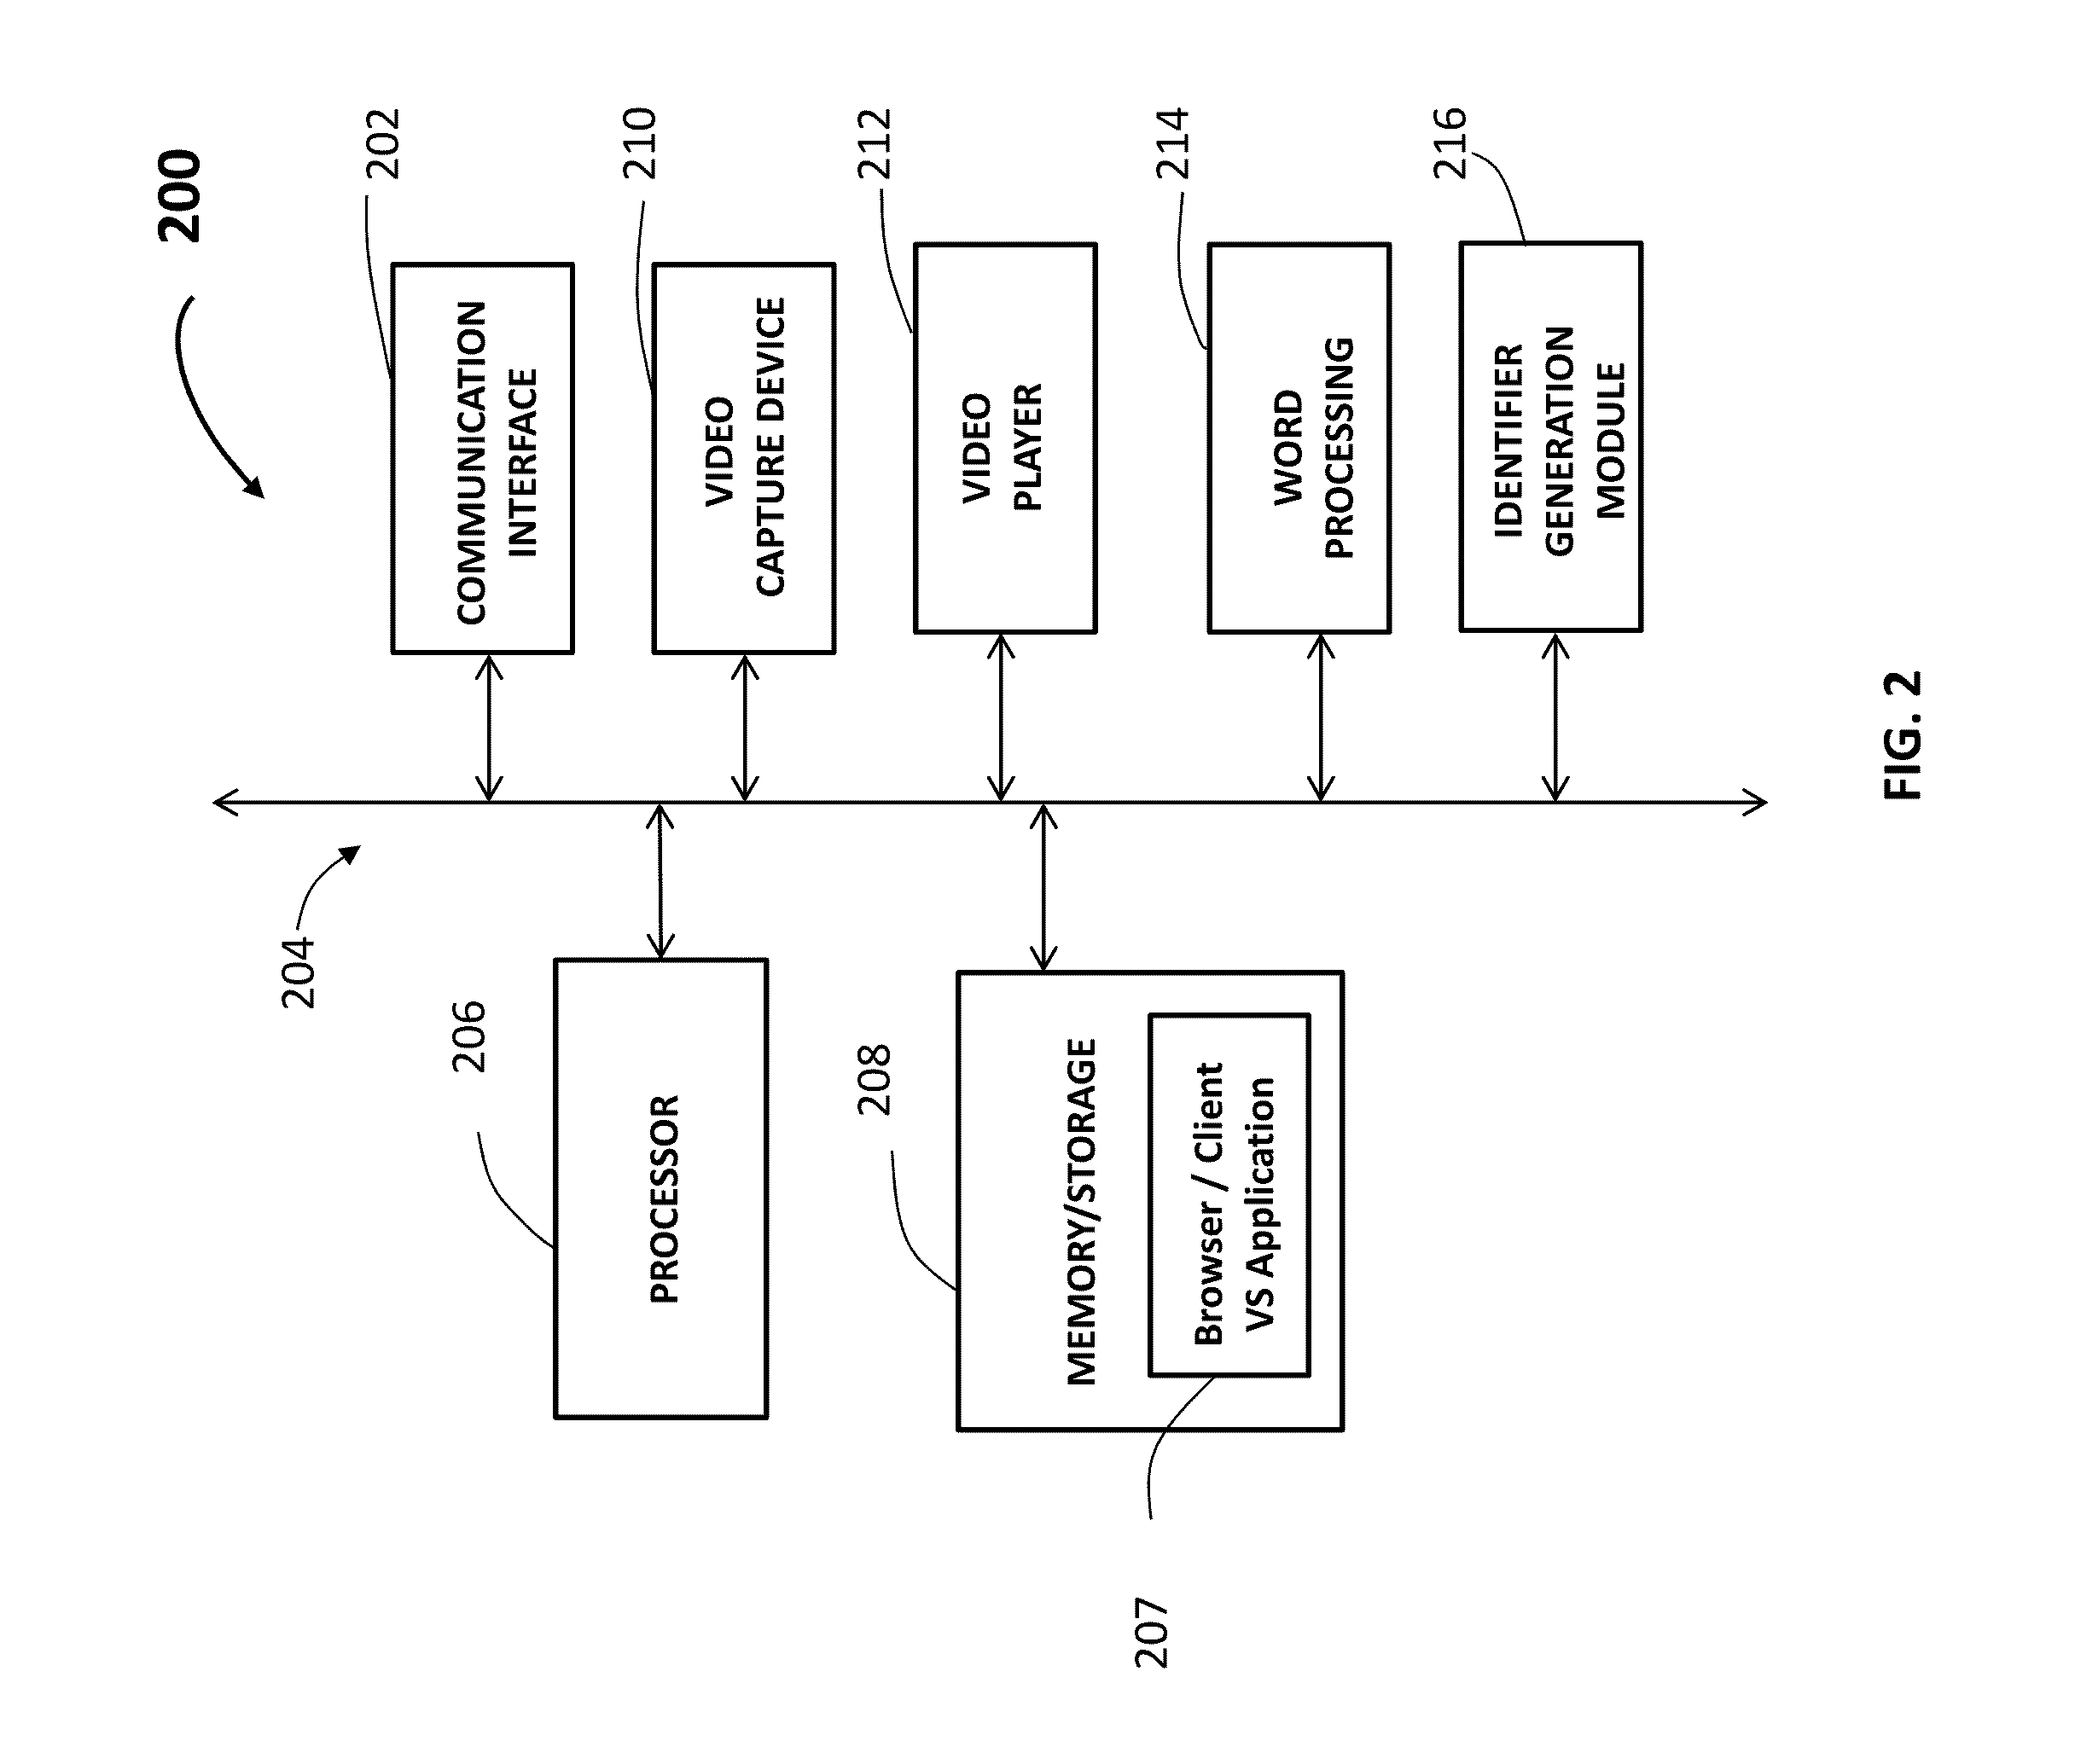 Video Signature System and Method